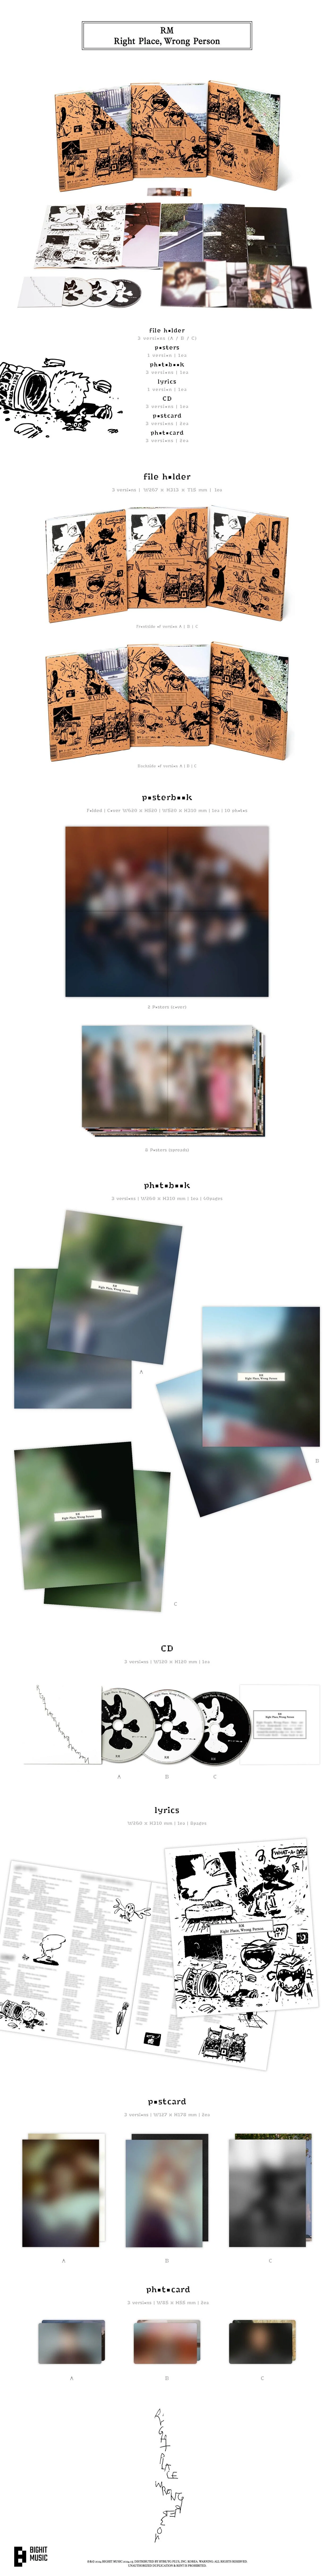 RM - RIGHT PLACE, WRONG PERSON SOLO 2ND ALBUM PHOTOBOOK SET CONTENTS